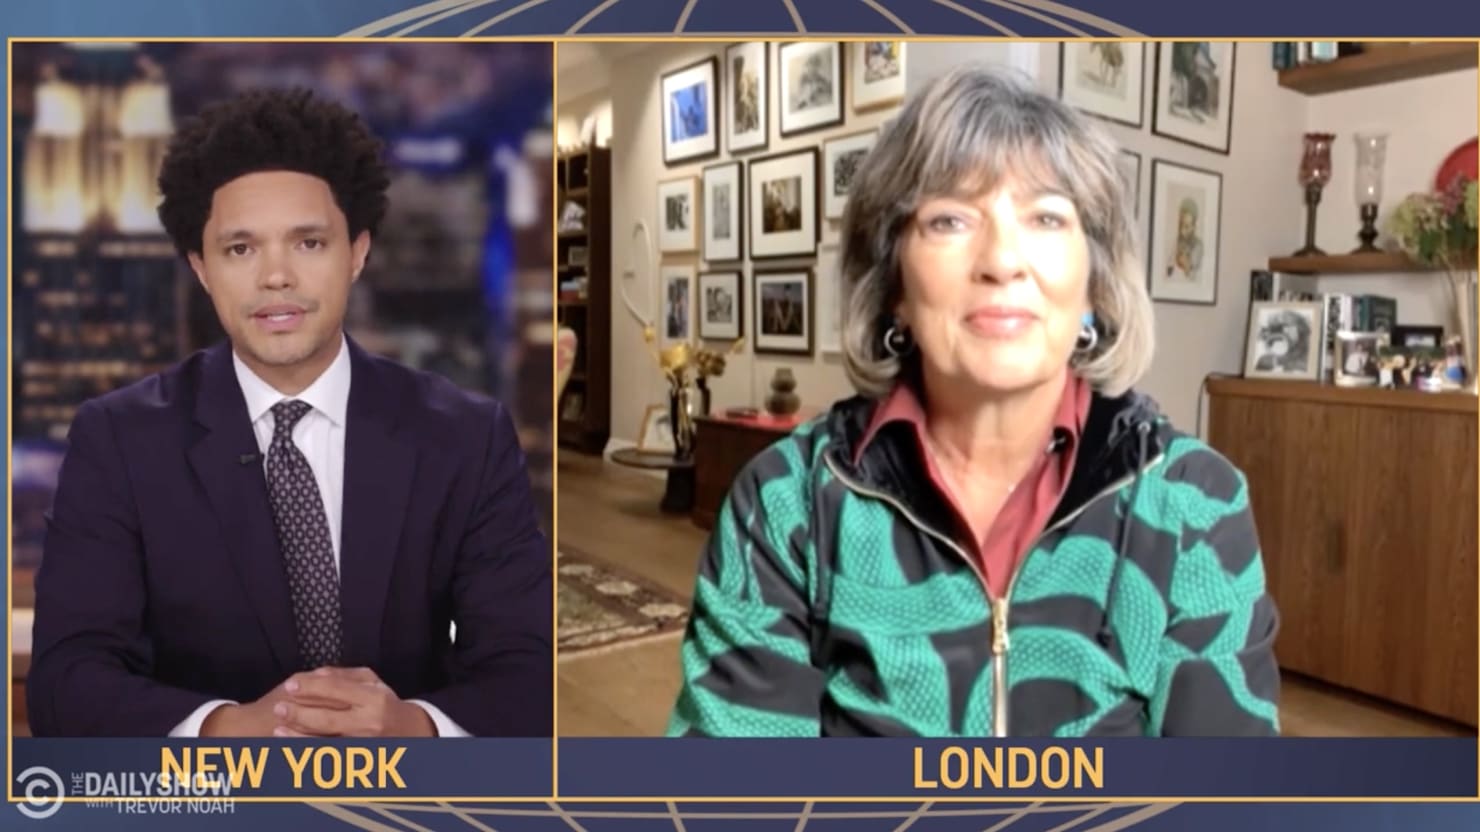 Christiane Amanpour reveals on ‘The Daily Show’ why she never wore this hijab